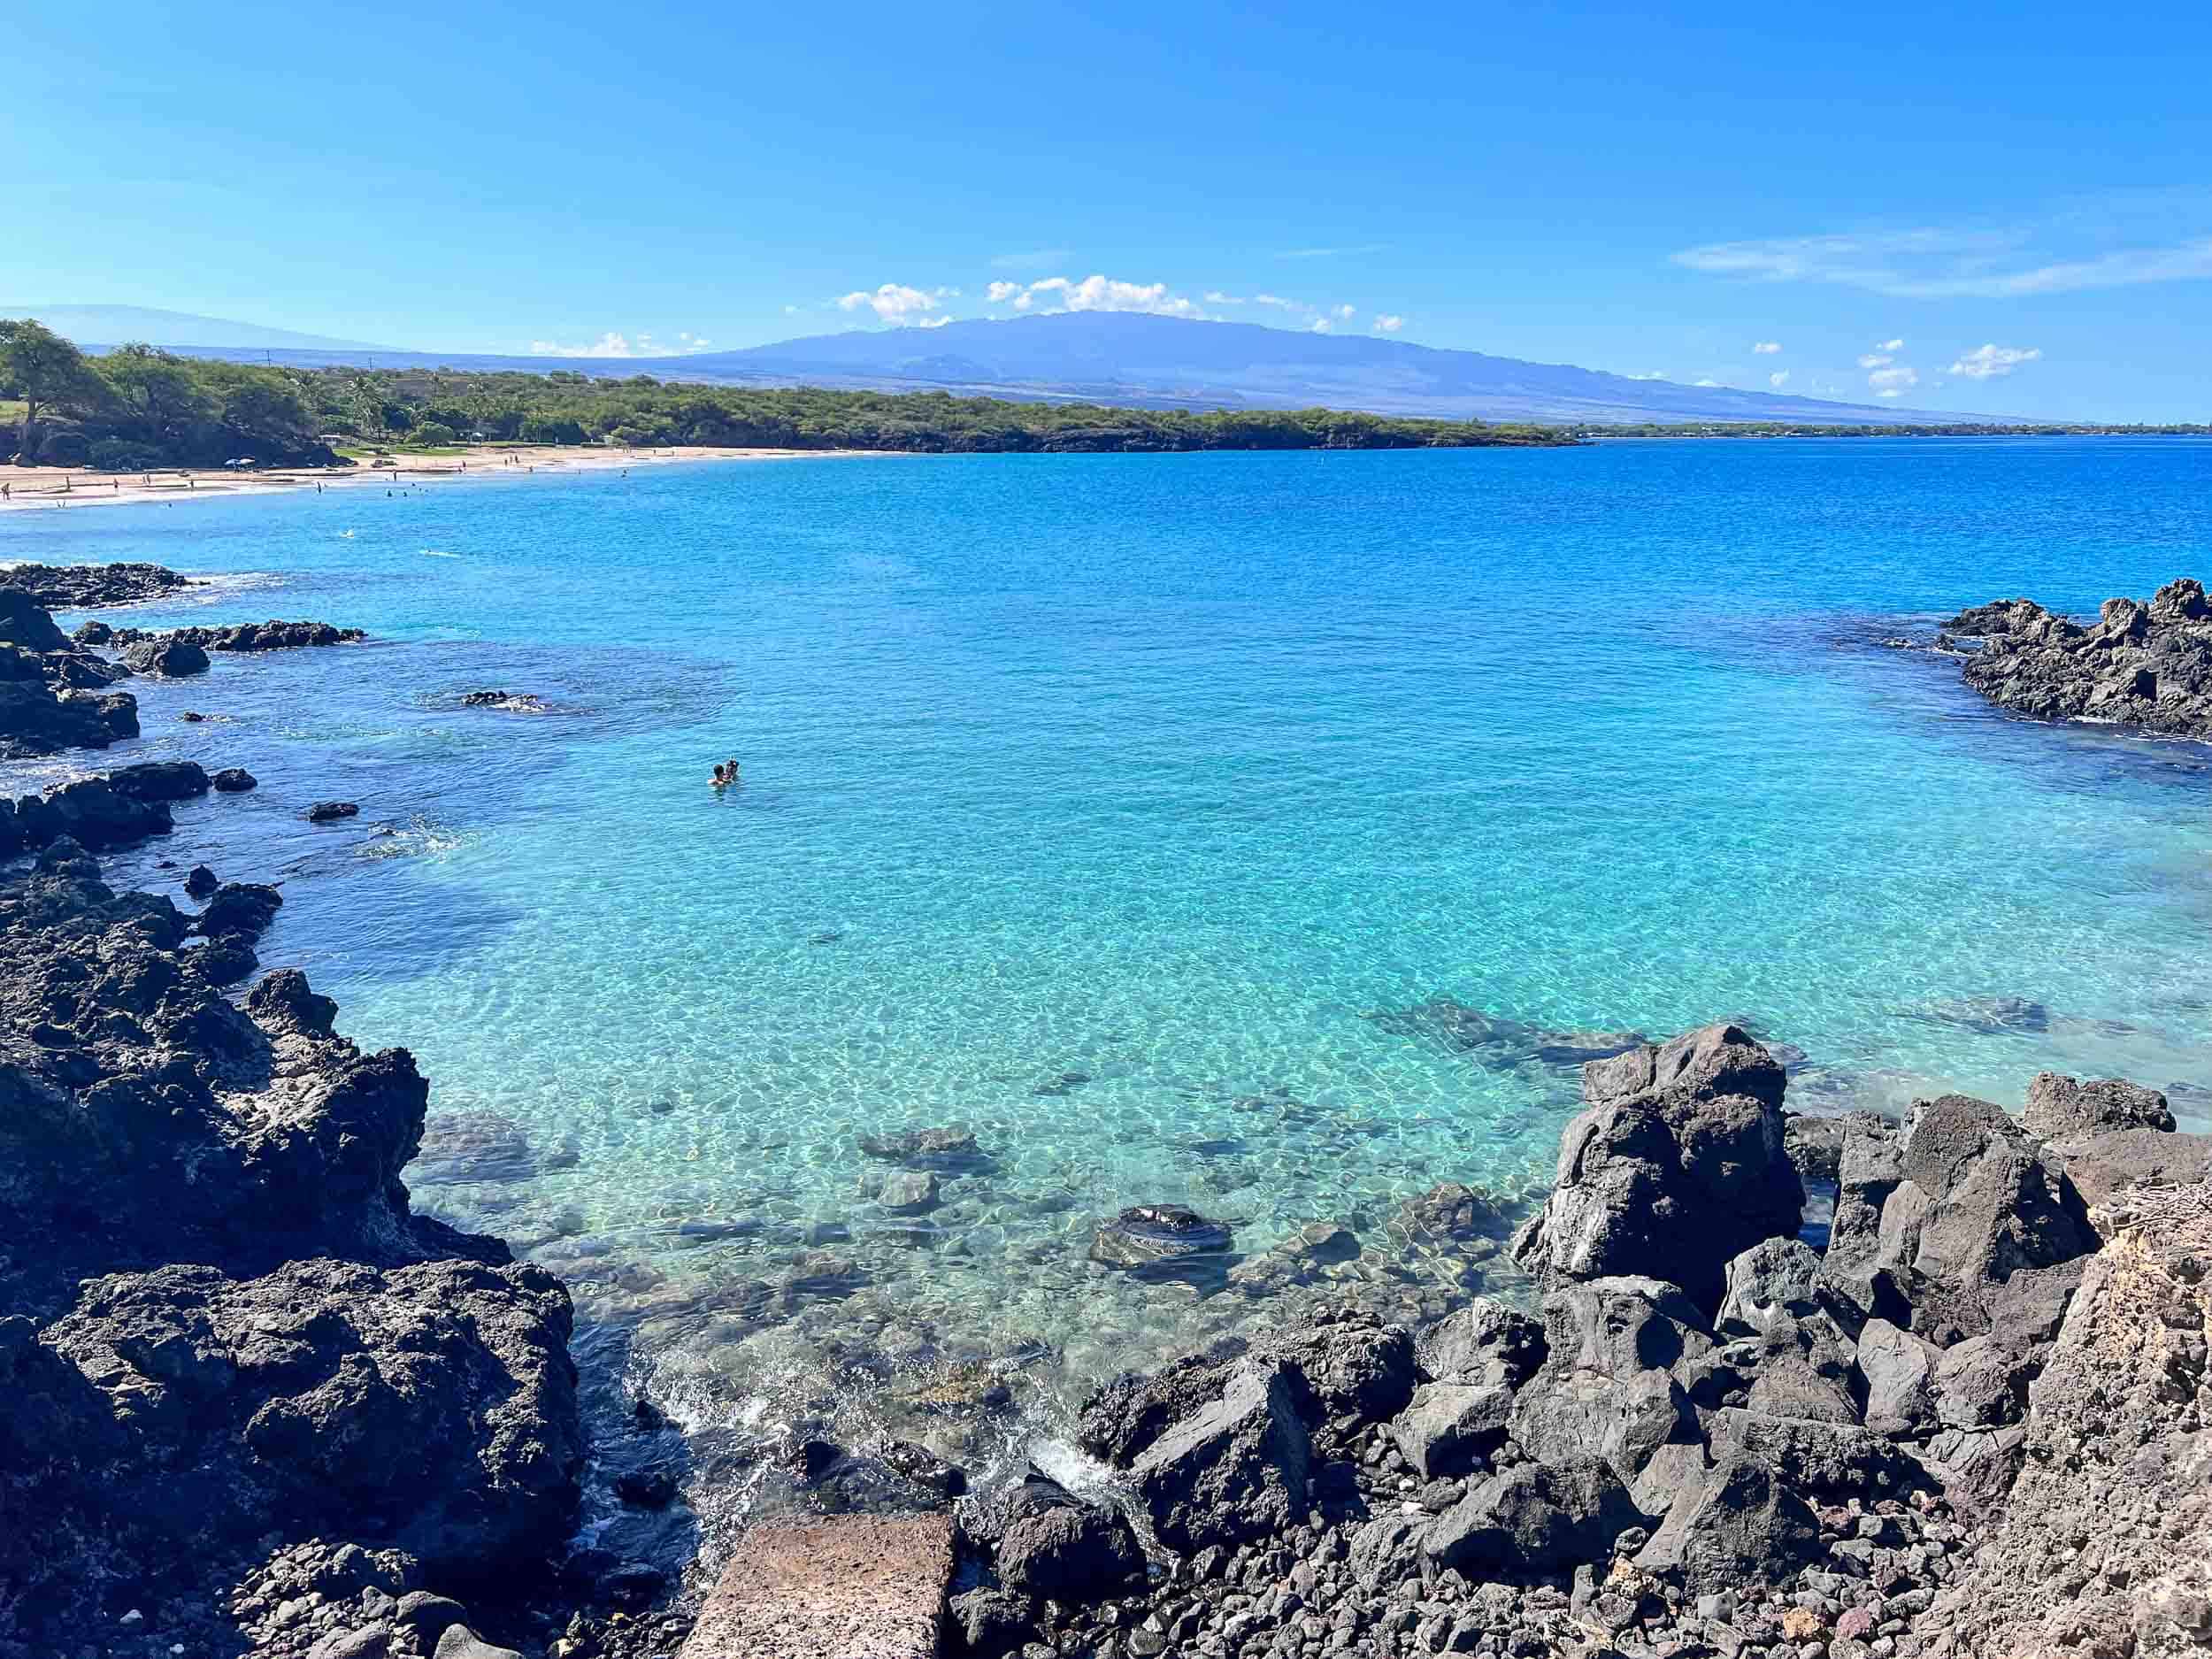 30 Seriously Fun Things to Do in Hilo, Hawaii (+Tips!)